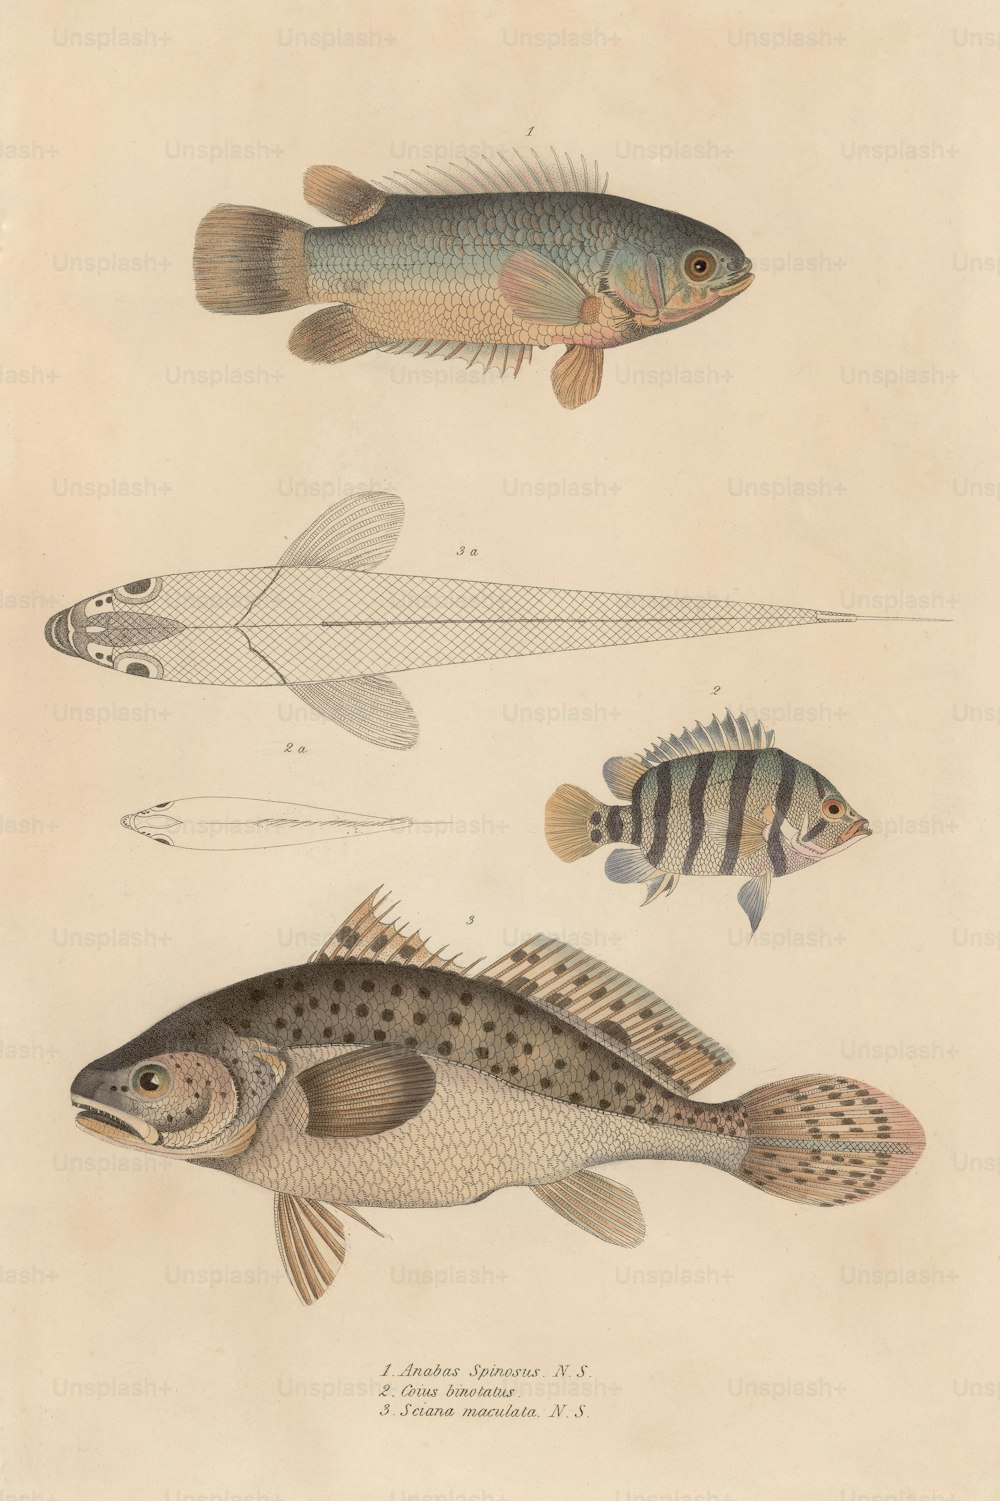 Divers poissons, dont anabas spinosus, coius binotatus et sciana maculata, vers 1850. (Photo de Hulton Archive/Getty Images)